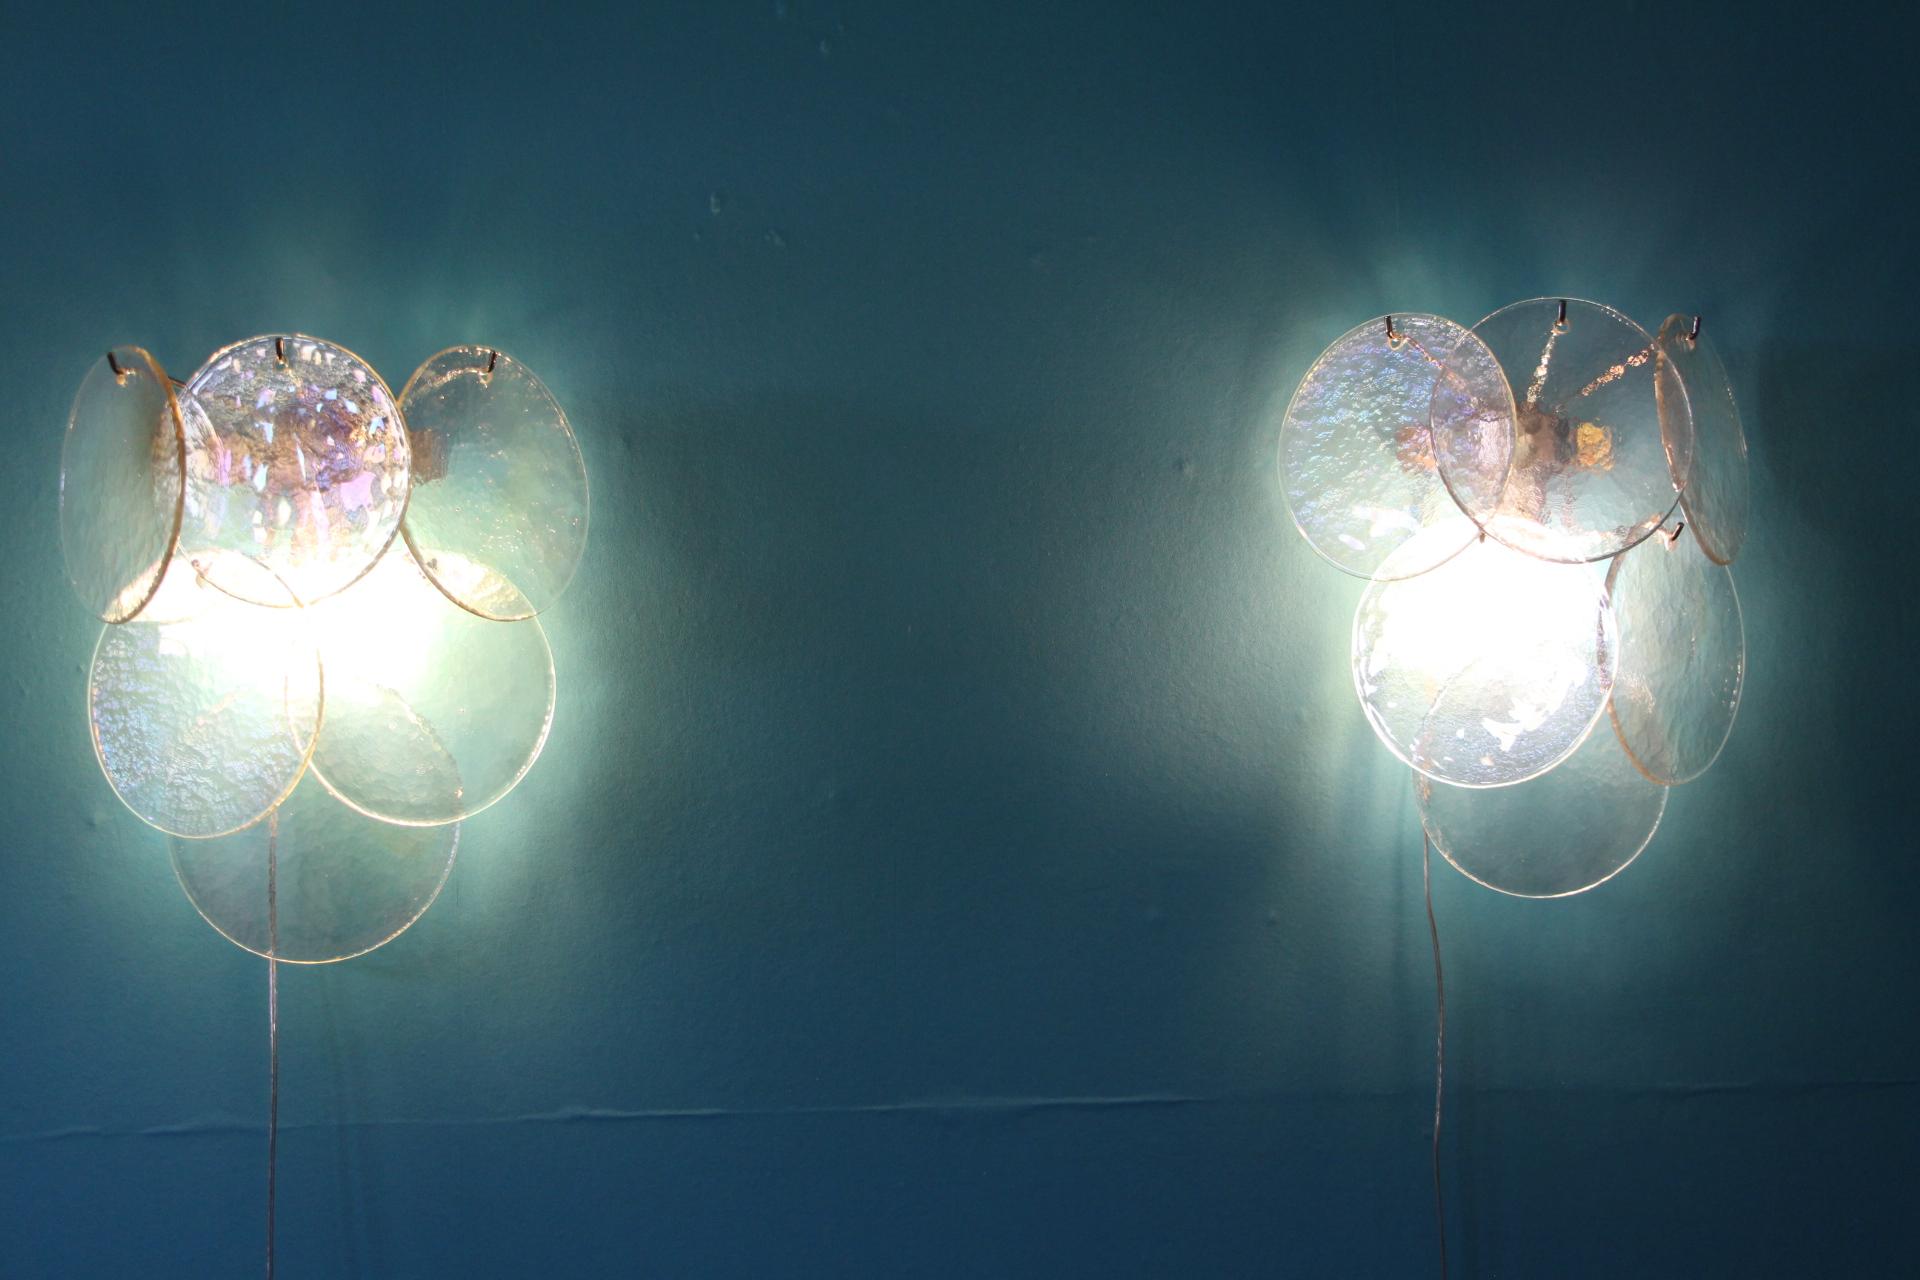 Exquisite pair of geometric structure holding iridescent and pearly Murano glass disks.Each glass disk has got magnificent blue,pink and green reflects 
Very elegant shape and colors.
1 bulb per light.
Take E14bulbs.Wired for the U.SThey are wired